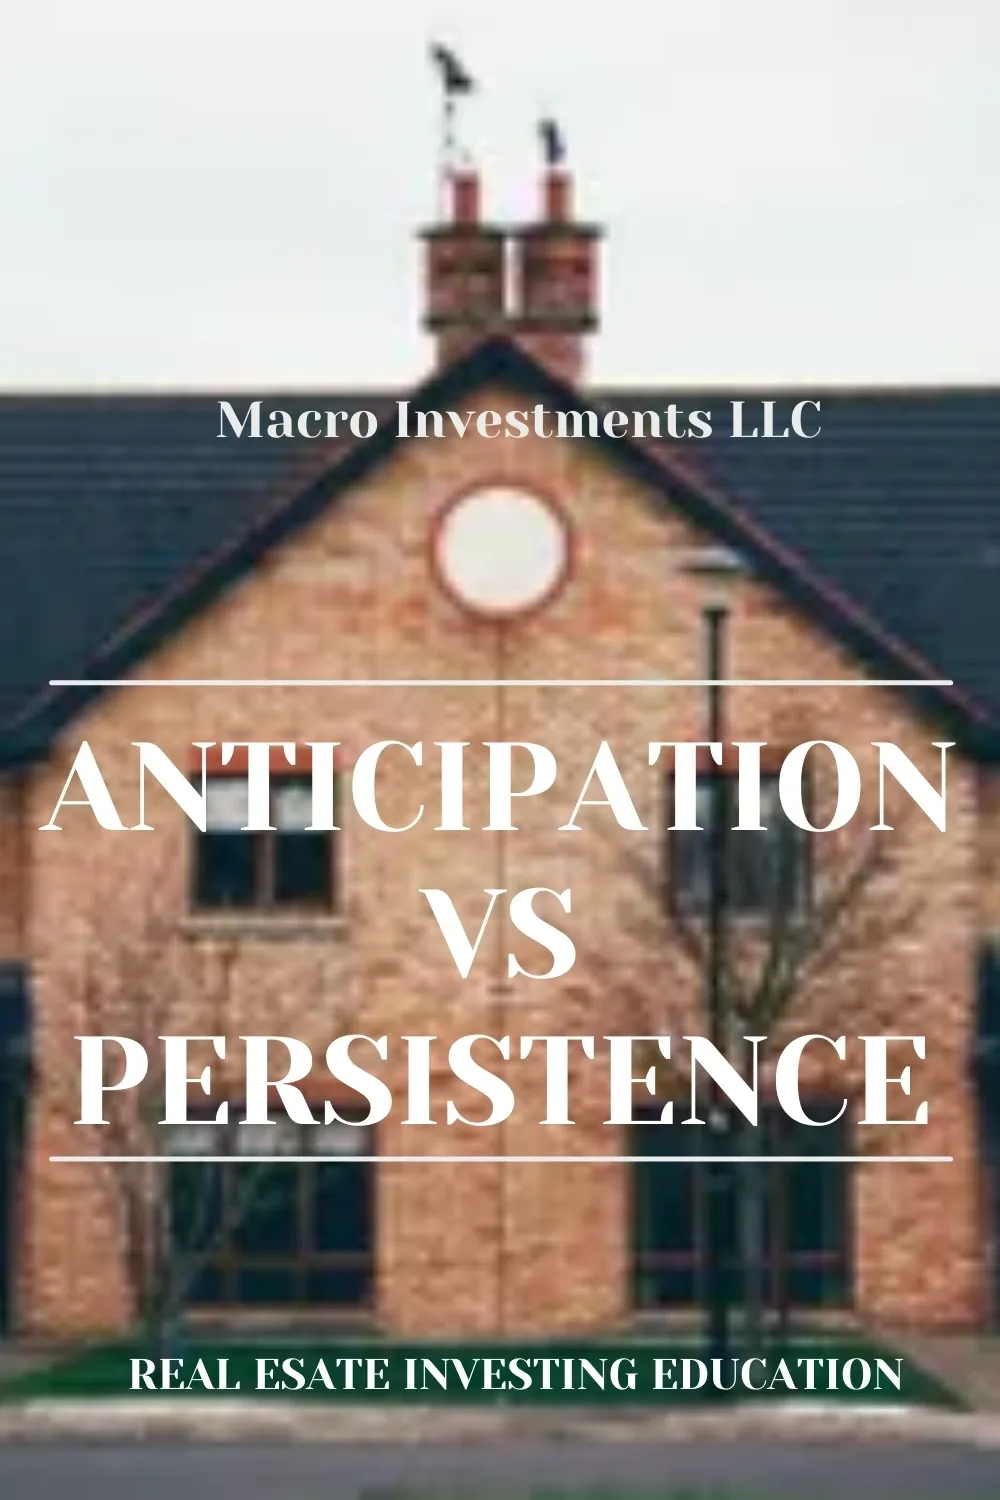 How to Determine When to Stay Persistent in Real Estate Investing | Blog | InvestingTE.com